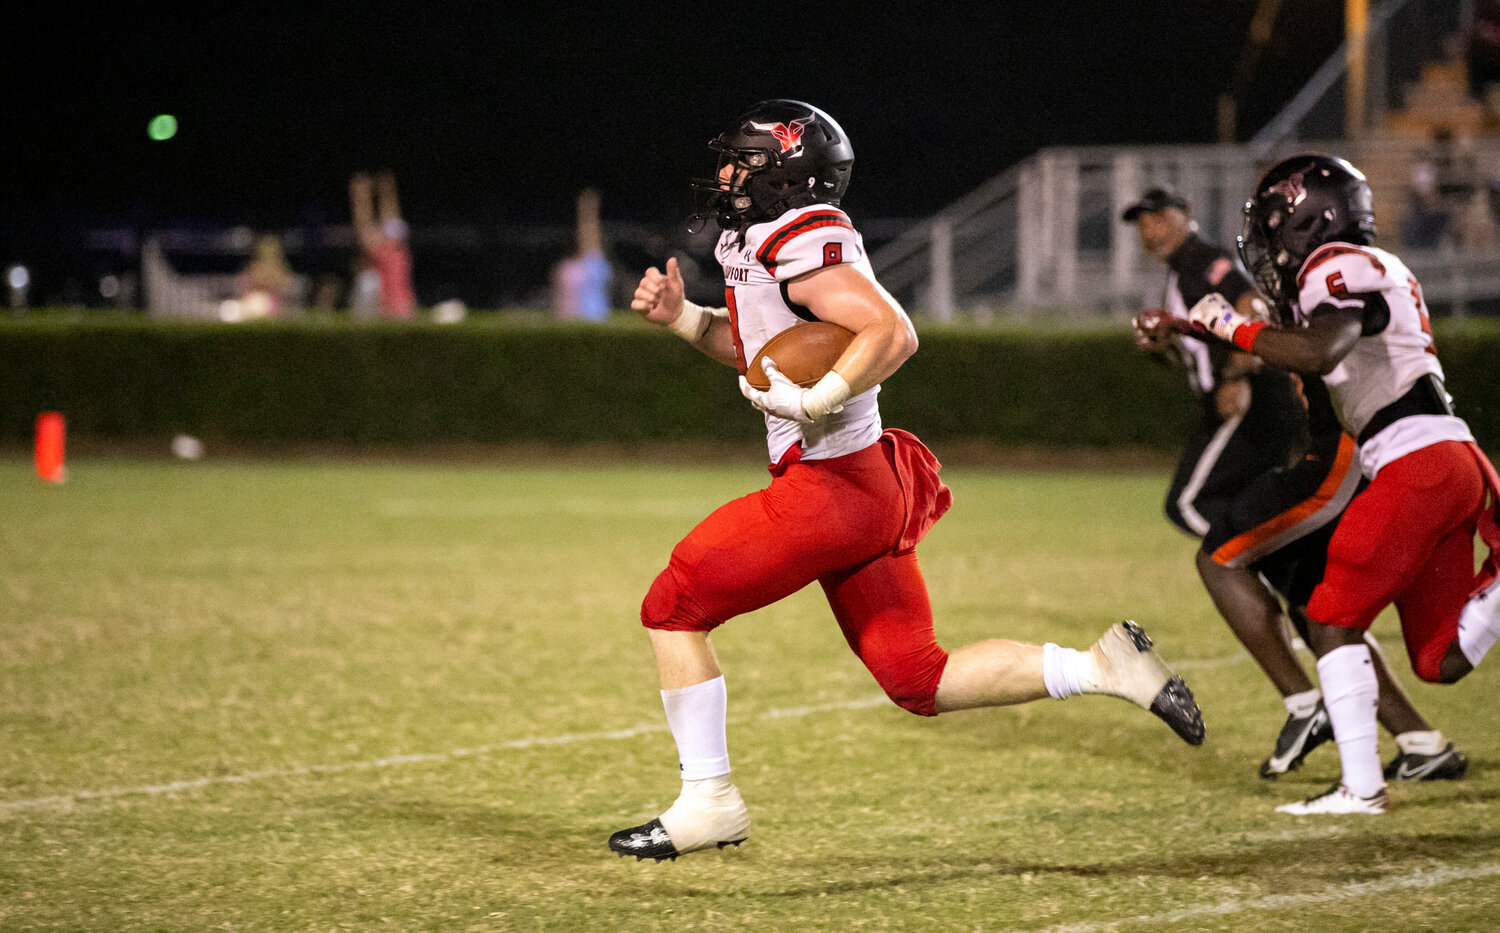 Spanish Fort’s Drew Williamson hits the open field on his 56-yard touchdown run that put the Toros ahead of the Baldwin County Tigers 14-13 in the third quarter of Friday’s Class 6A Region 1 game at Lyle Underwood Stadium in Bay Minette. It was just the second play after Williamson took over at quarterback.